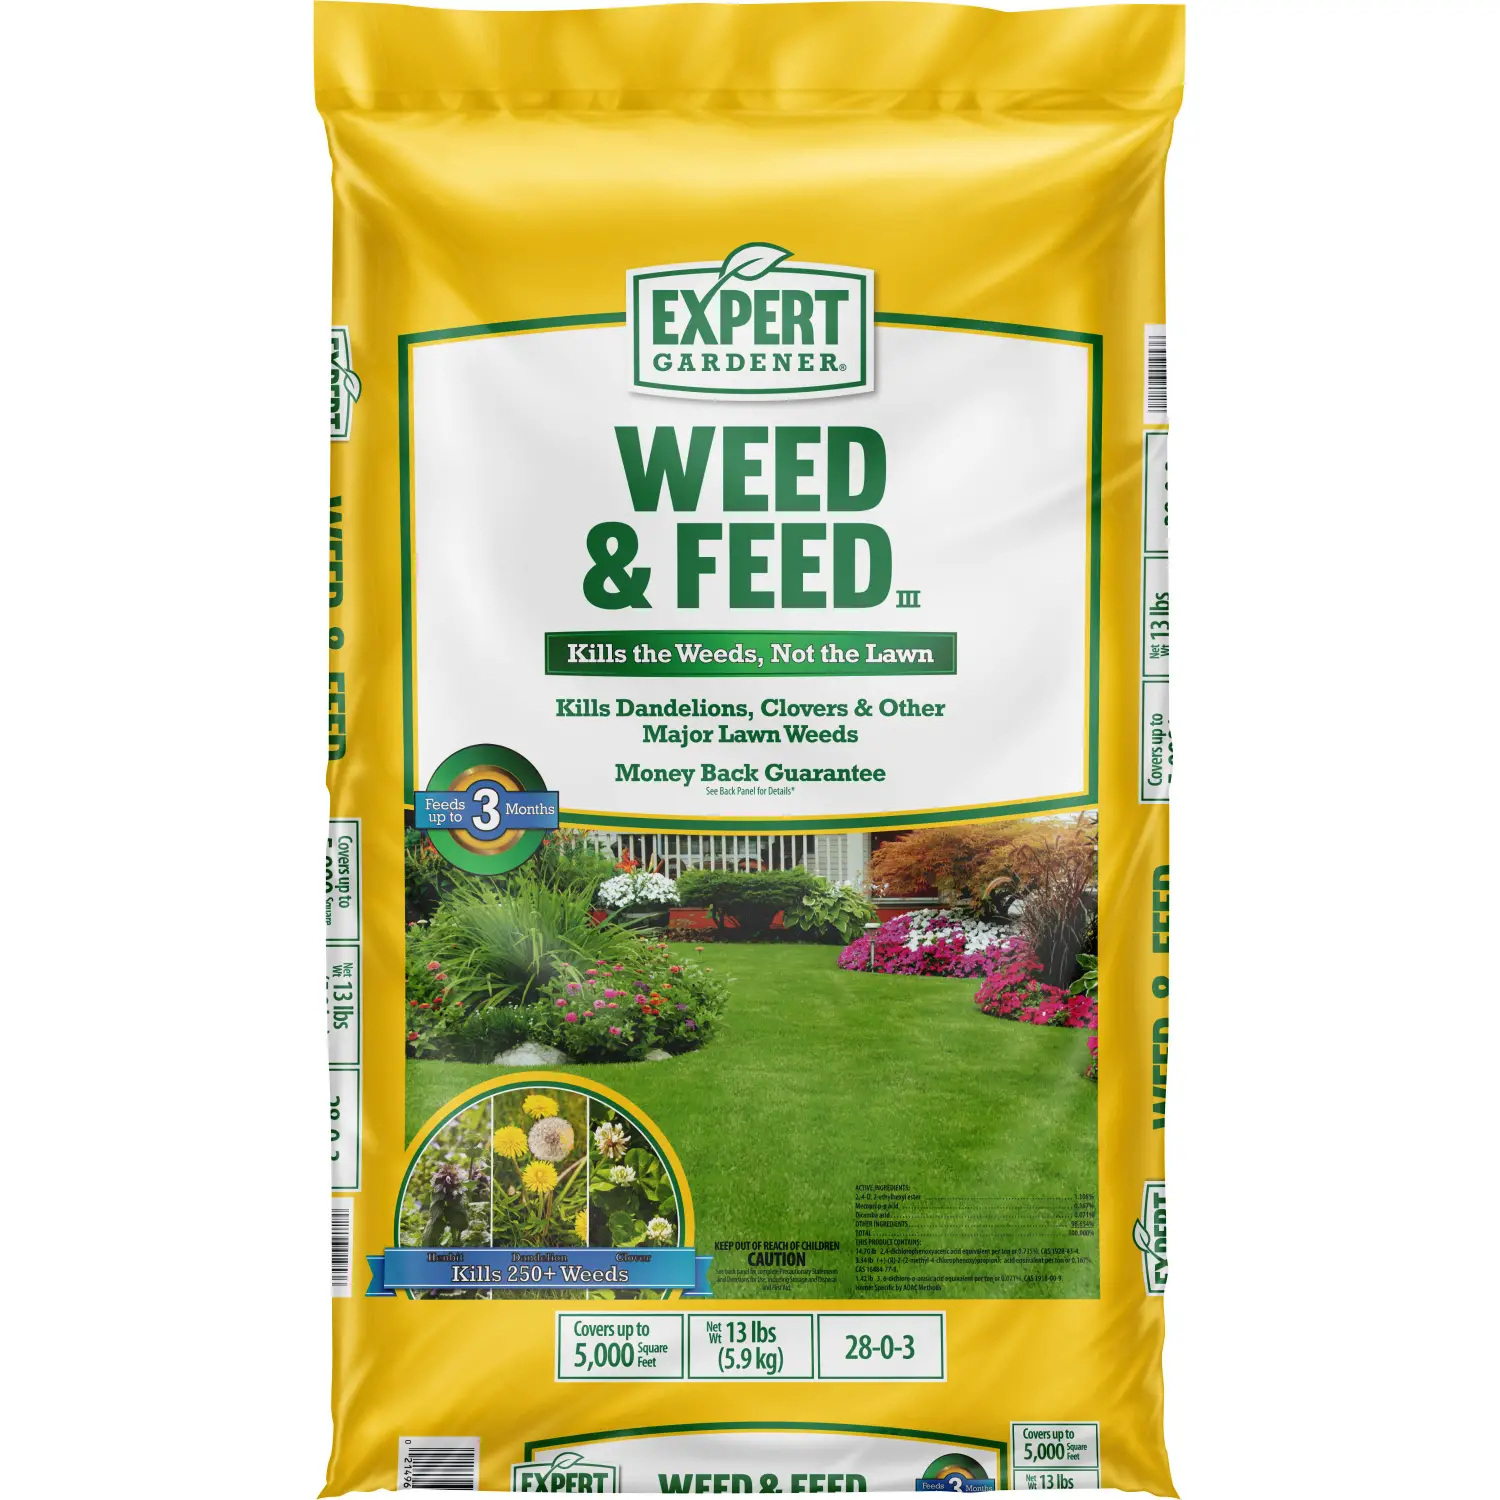 Weed and Feed Fertilizer Covers 5,000 sq. ft. Kills 250+ Weeds Garden ...